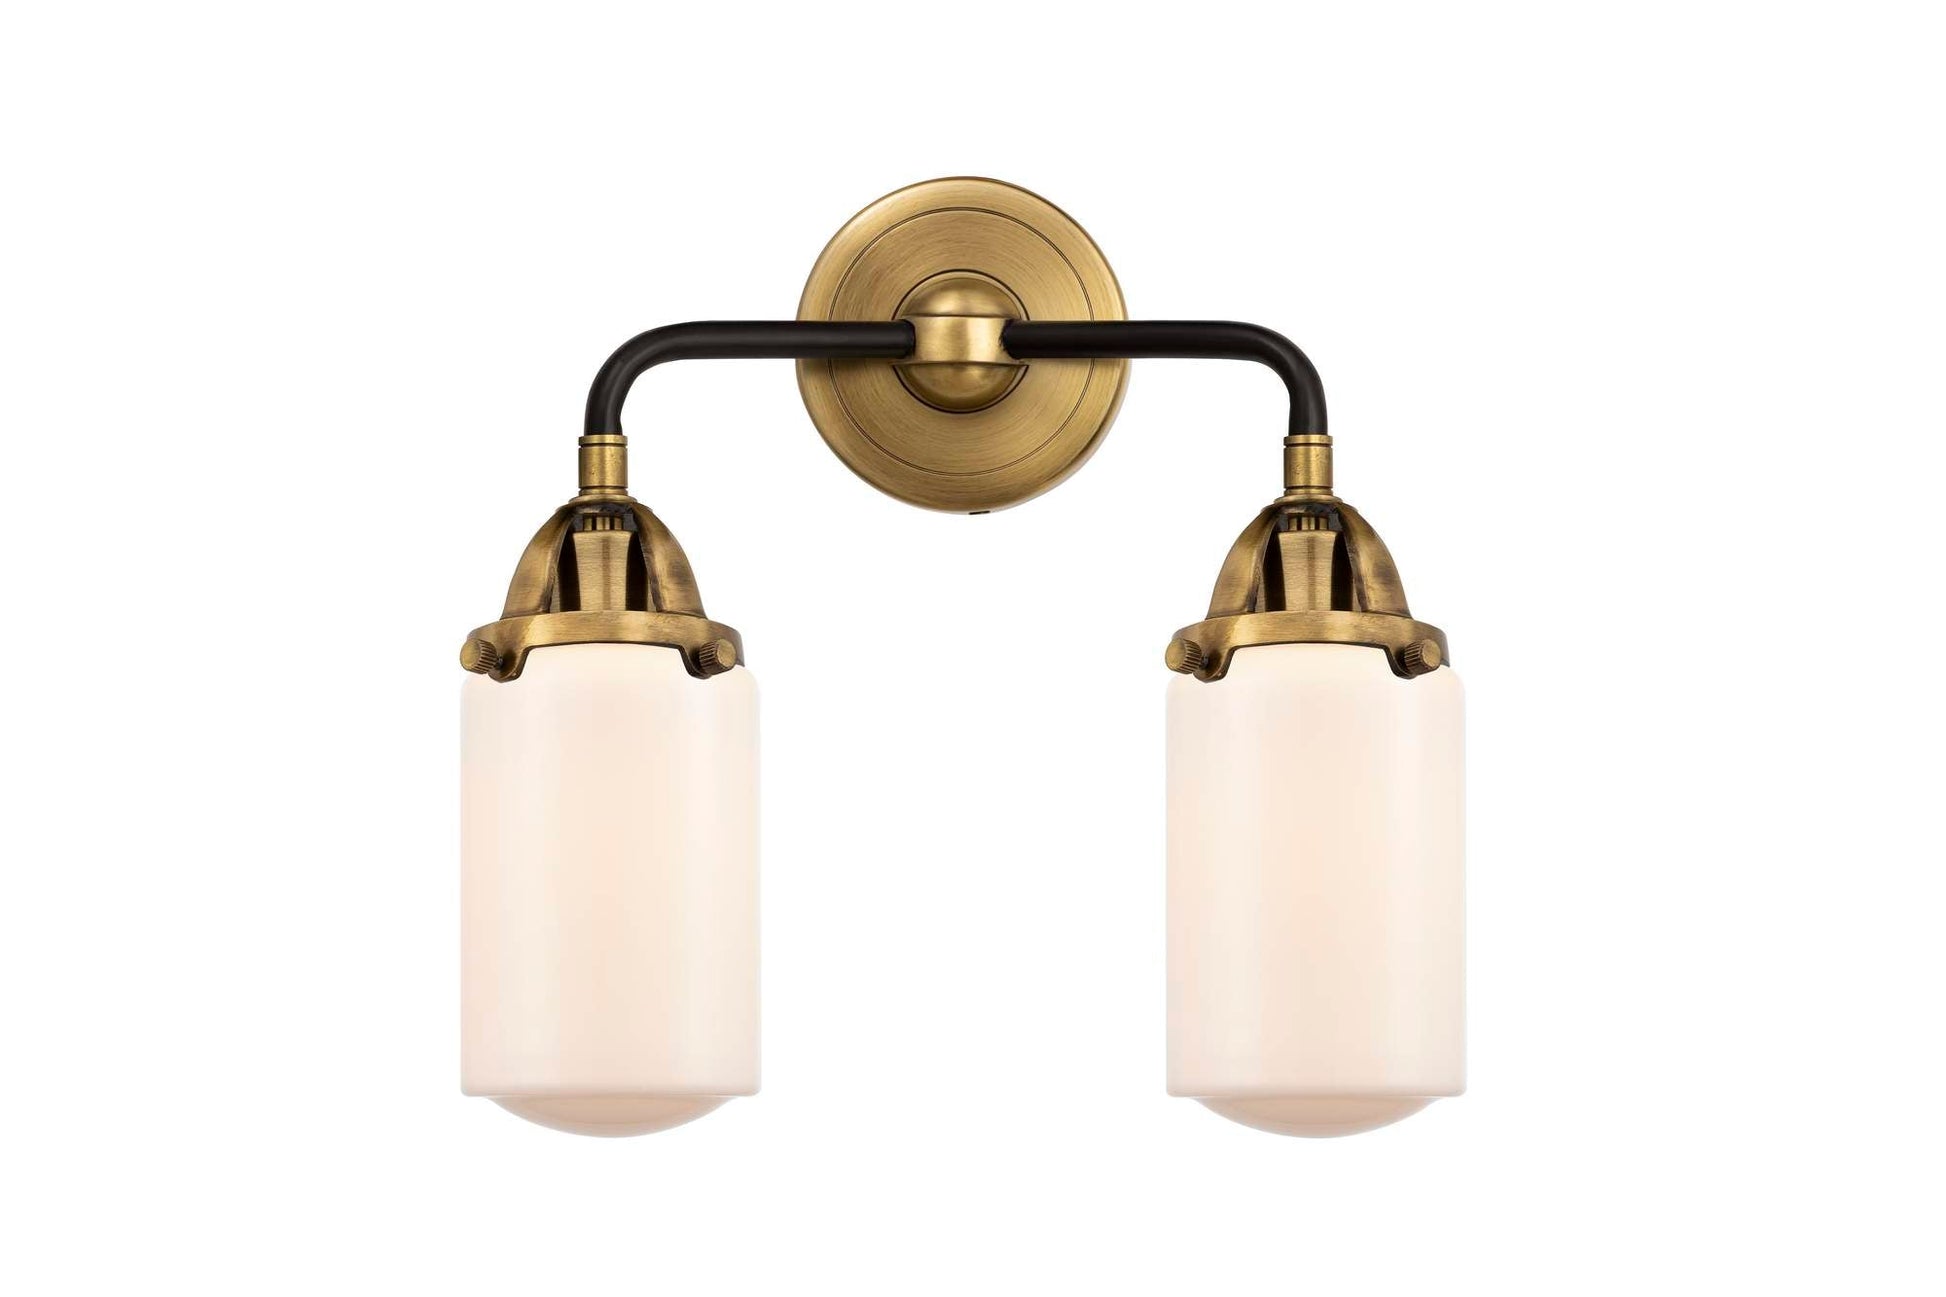 288-2W-BAB-G311 2-Light 12.5" Black Antique Brass Bath Vanity Light - Matte White Cased Dover Glass - LED Bulb - Dimmensions: 12.5 x 6.5 x 12.875 - Glass Up or Down: Yes